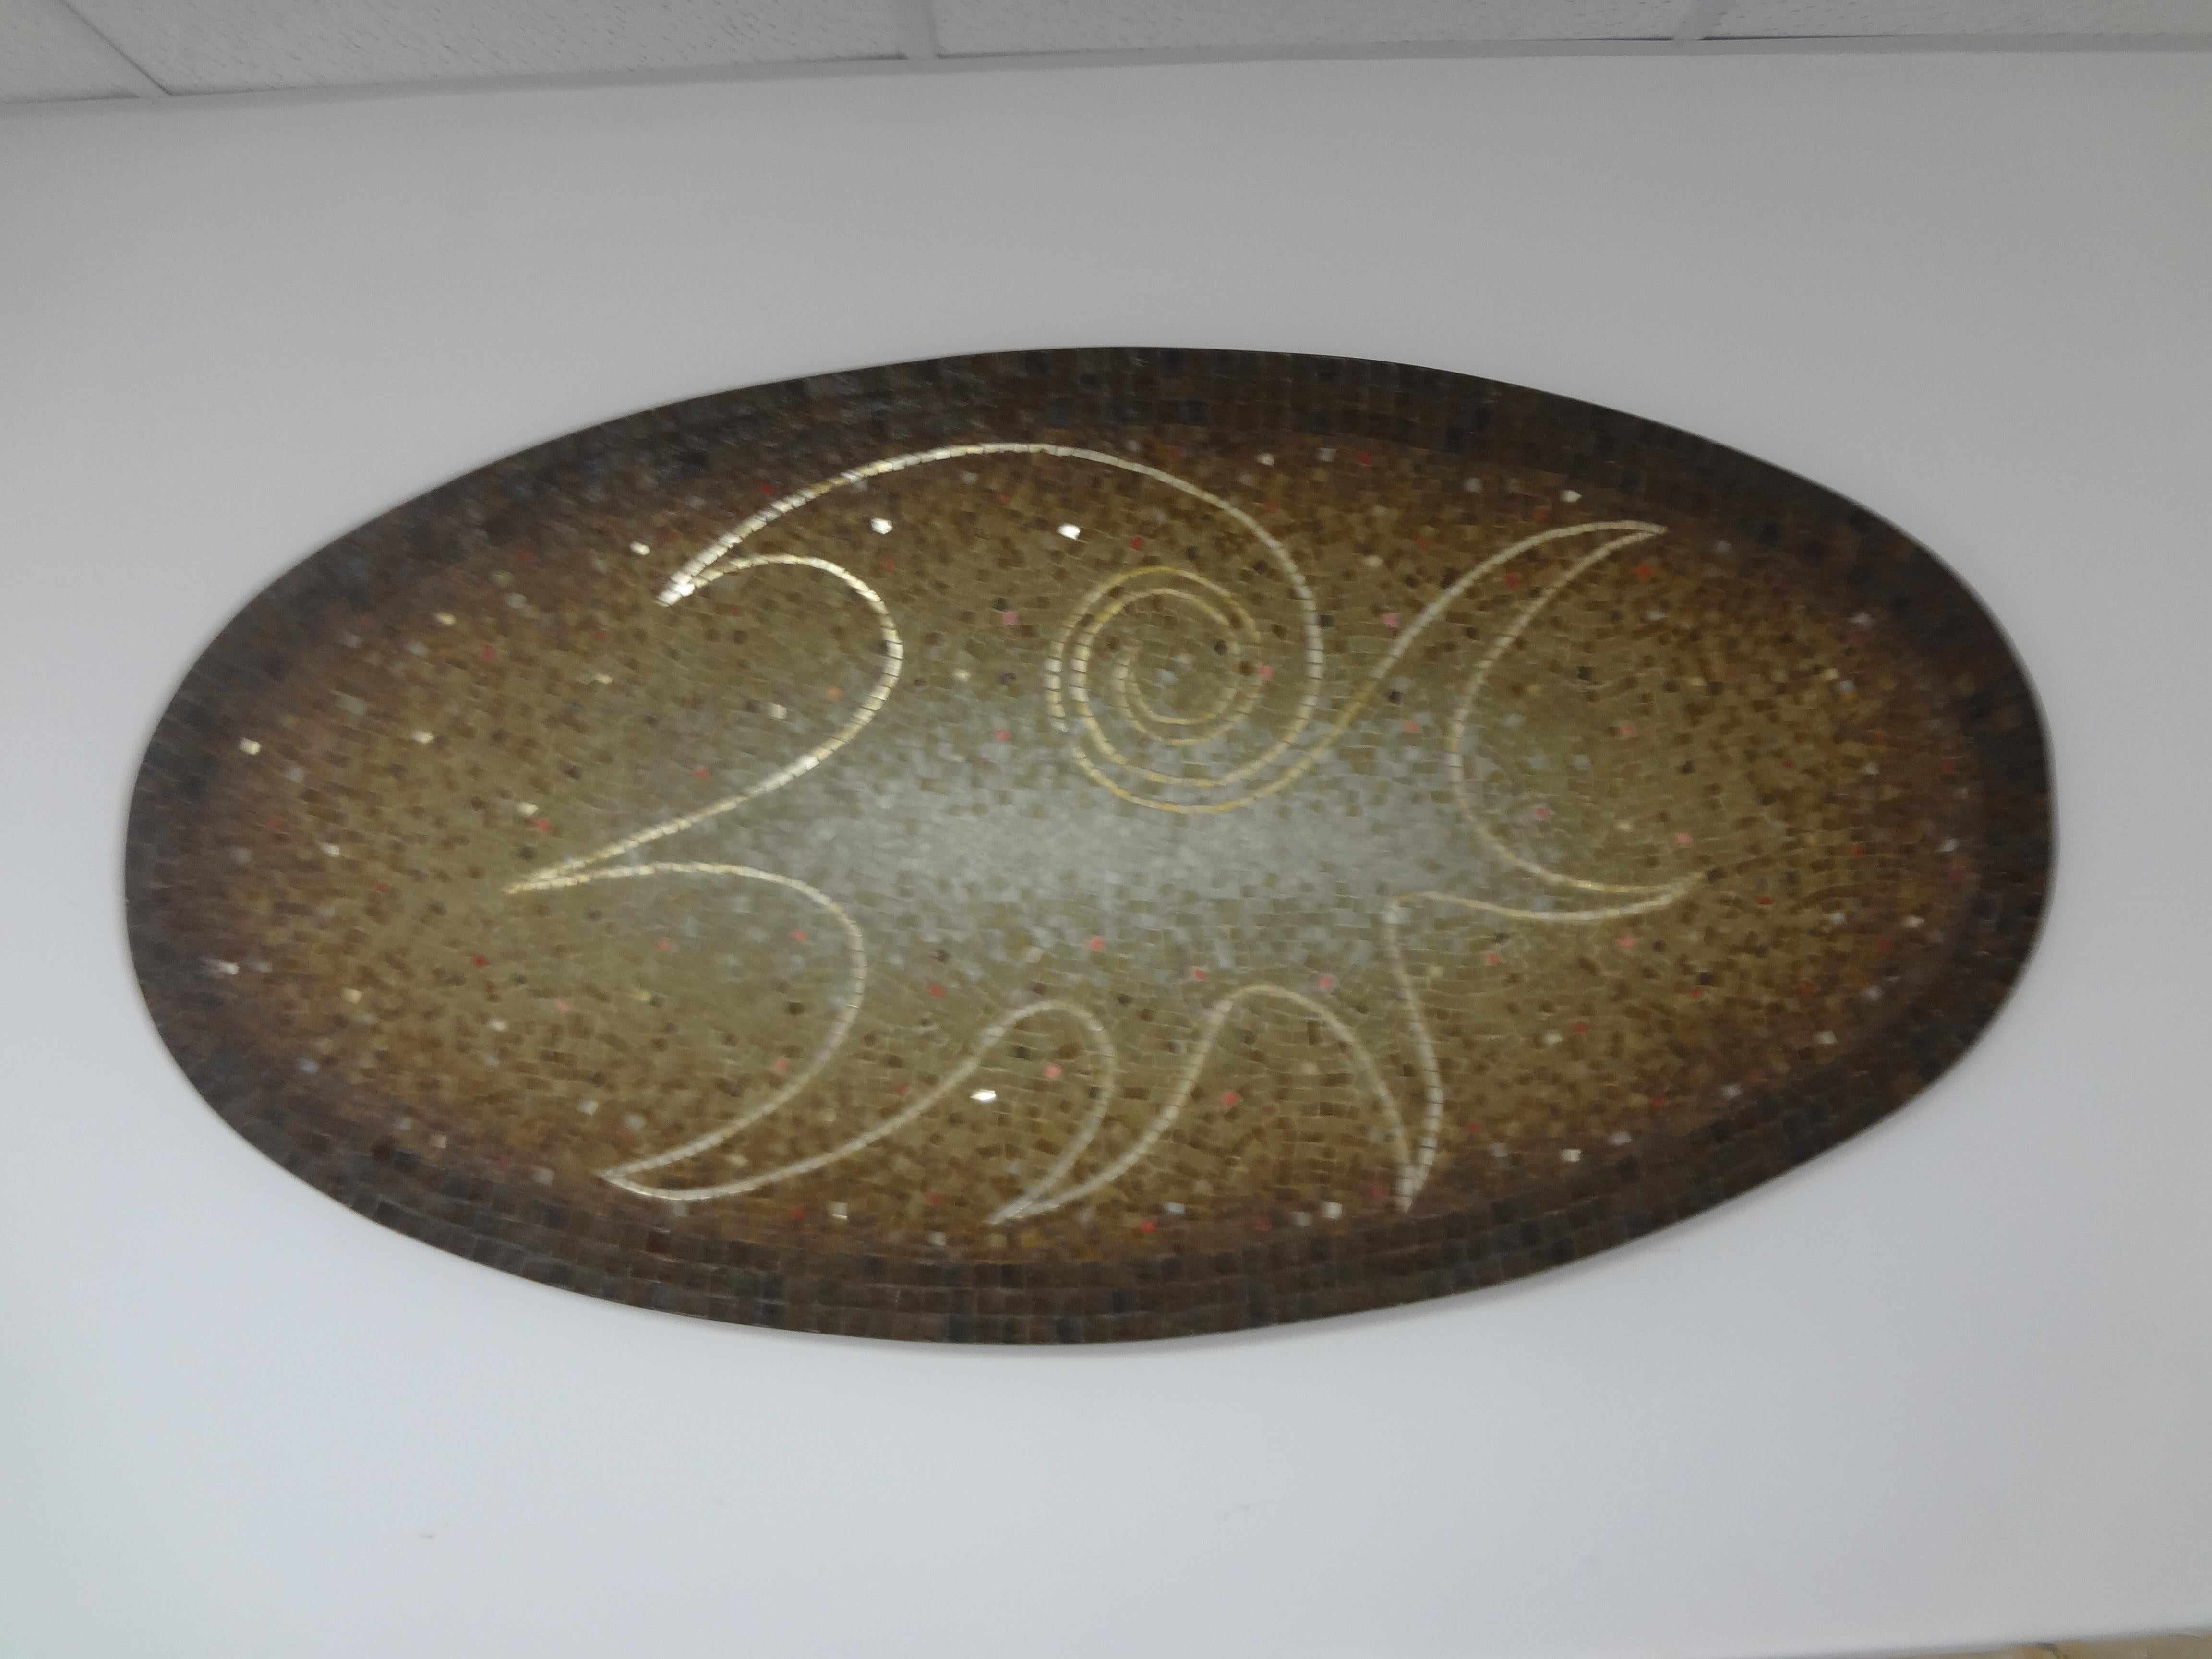 Large Mexican Modern Mosaic Tile Wall Sculpture Signed Genaro Alvarez. 
Our mid century modern wall sculpture is made up of an abstract ceramic tile design mounted on wood with a brass band border.
This stunning large Mexican modern oval mosaic wall